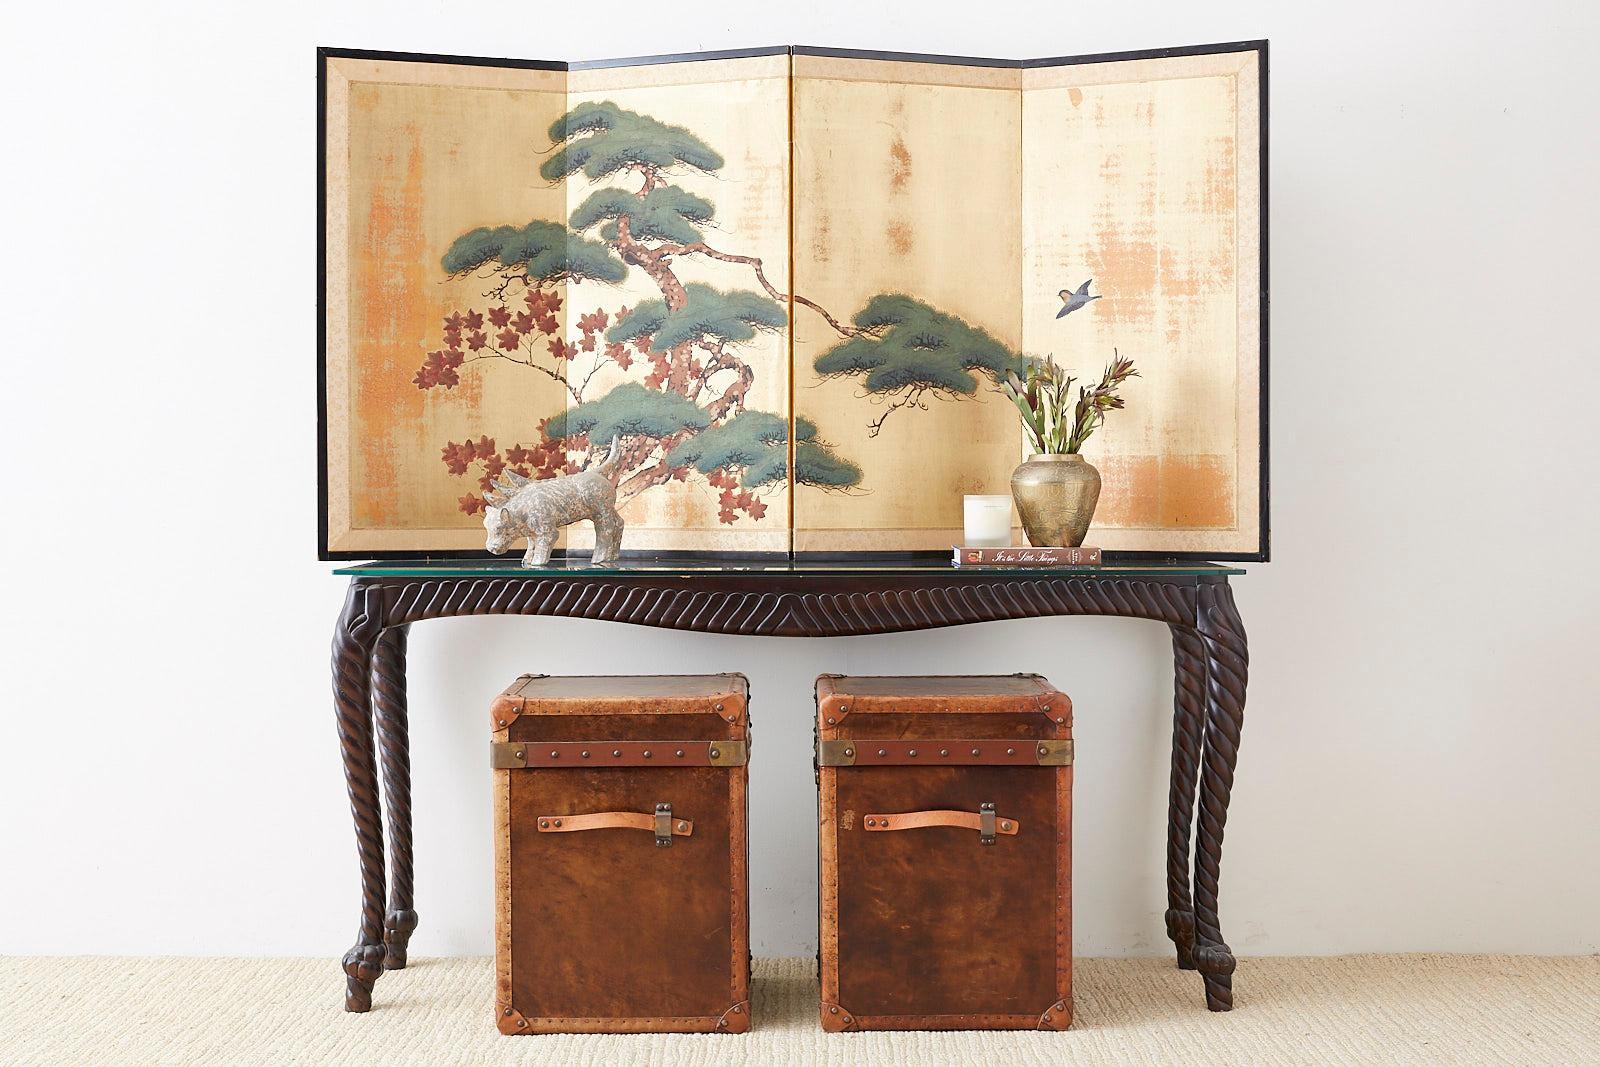 Midcentury Japanese four-panel screen depicting a pine tree and maple tree with a sparrow. Ink and color pigments over a printed silk ground of distressed squares of gilt. Set in a lacquered frame with a silk brocade border.